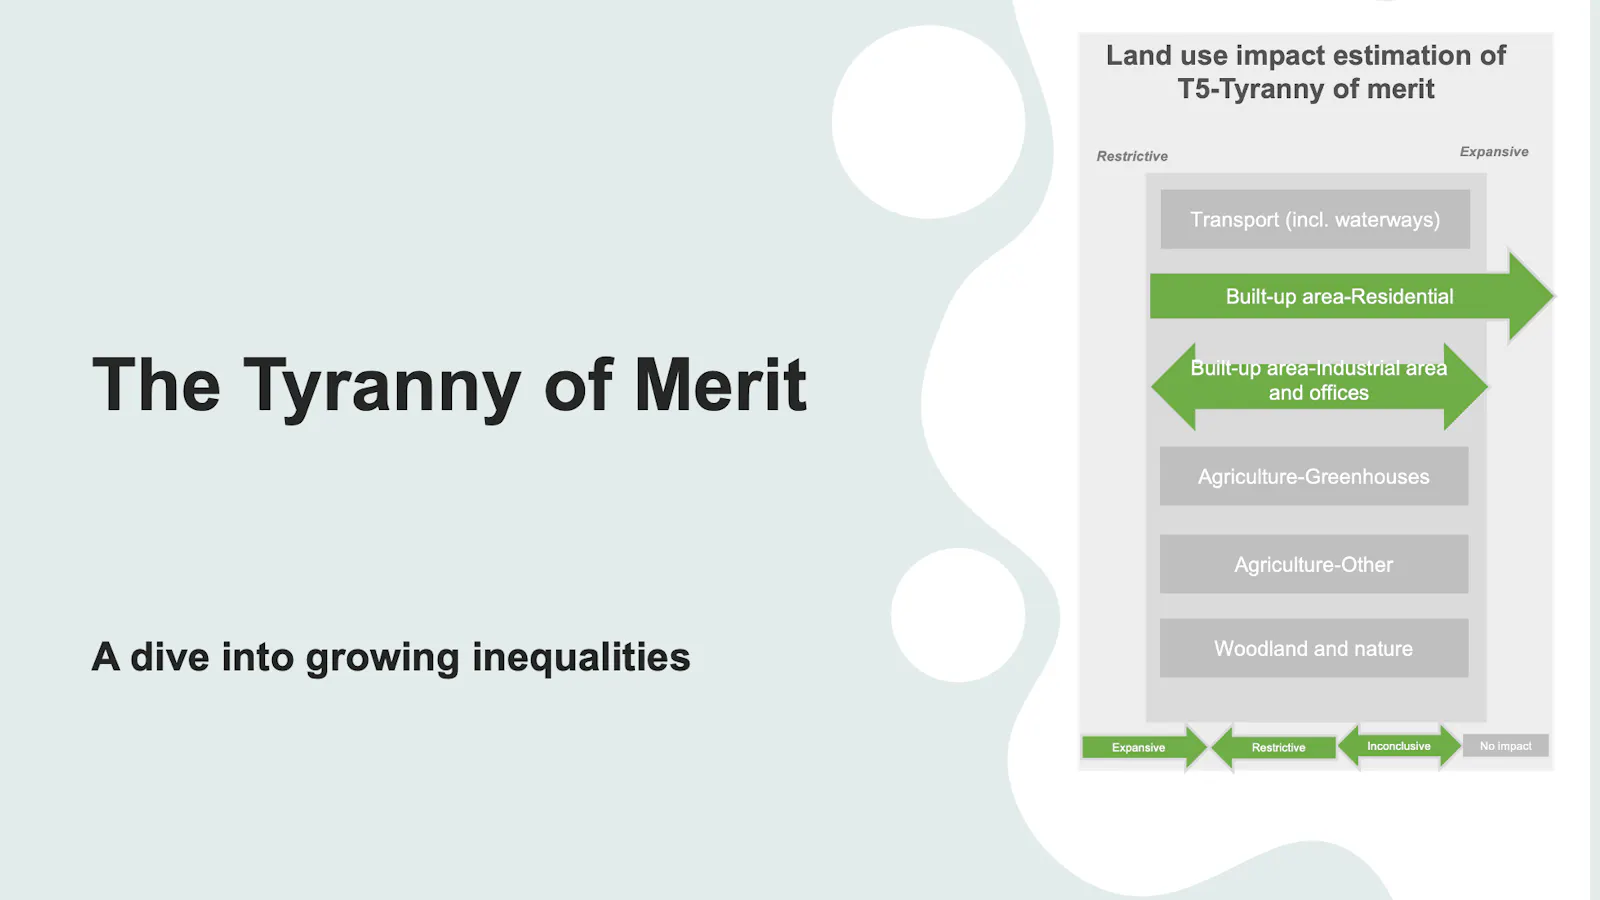 The Tyranny of Merit: A dive into growing inequalities